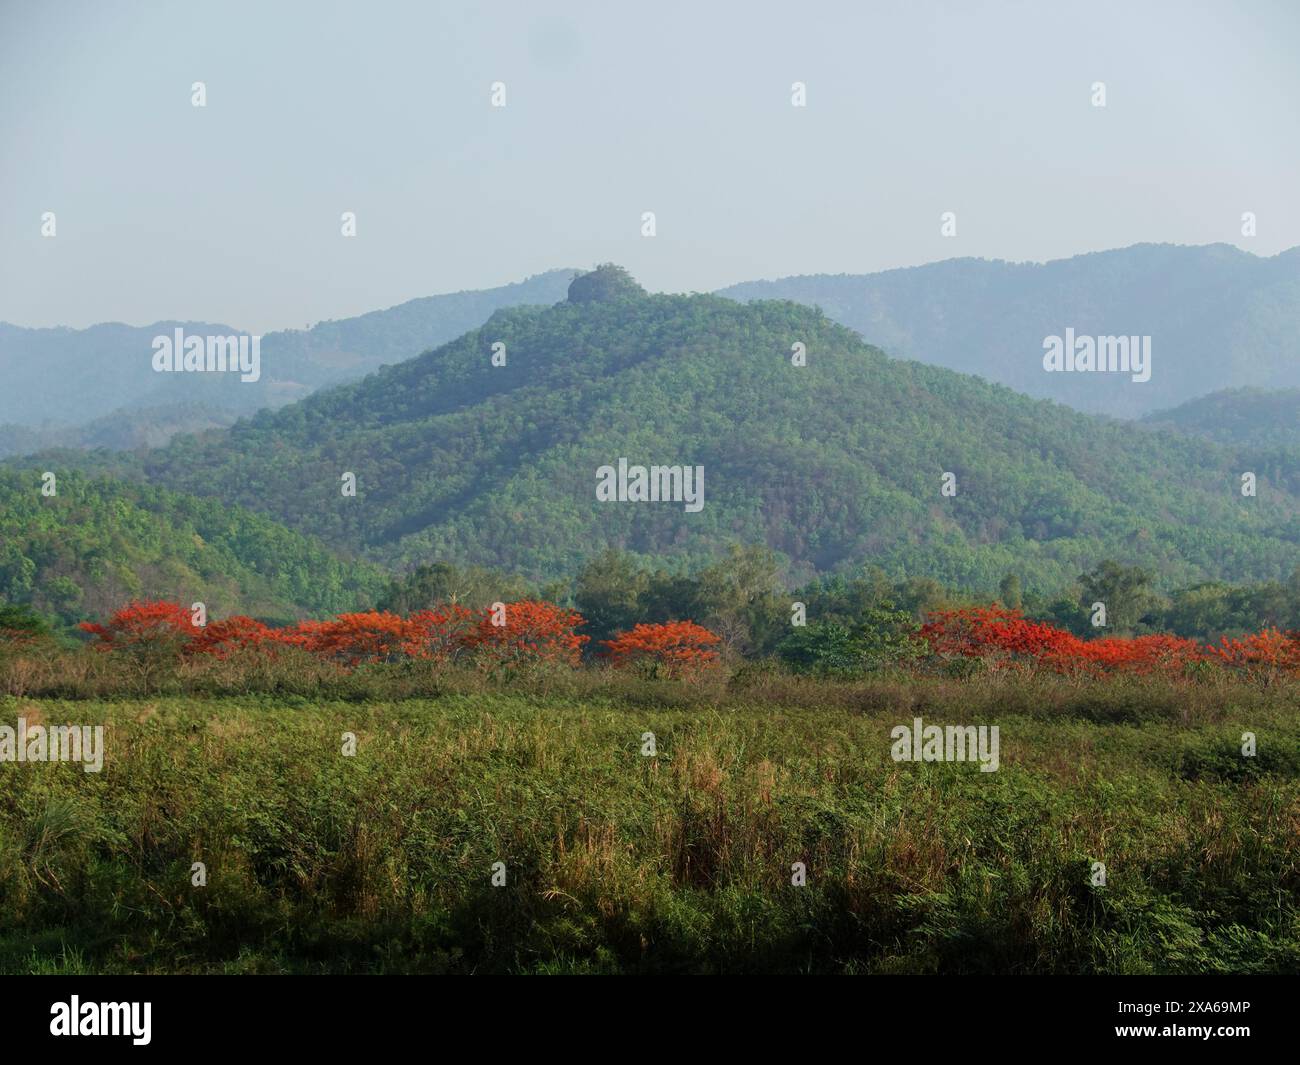 The Scenic view of distant trees on hilltops in Thailand Stock Photo